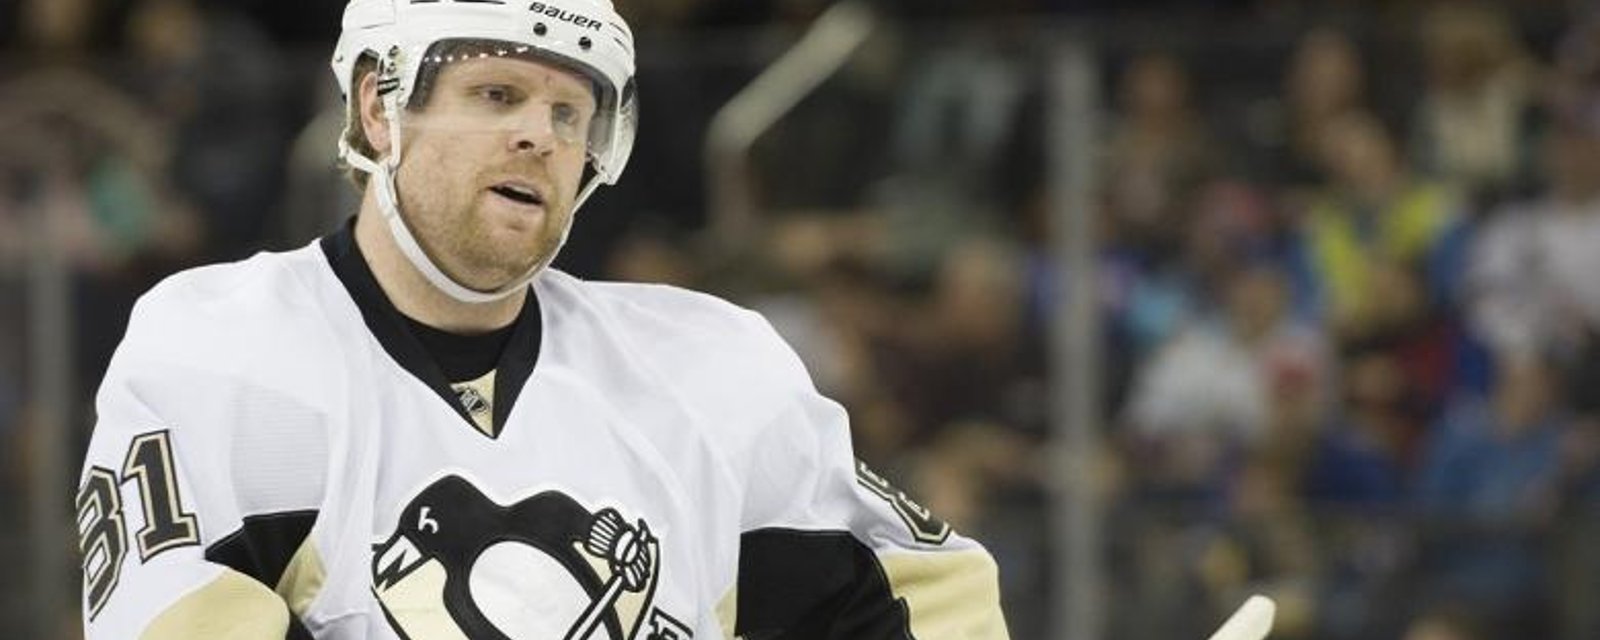 Kessel fulfills his promise to bring the Cup to Toronto in a very special way.